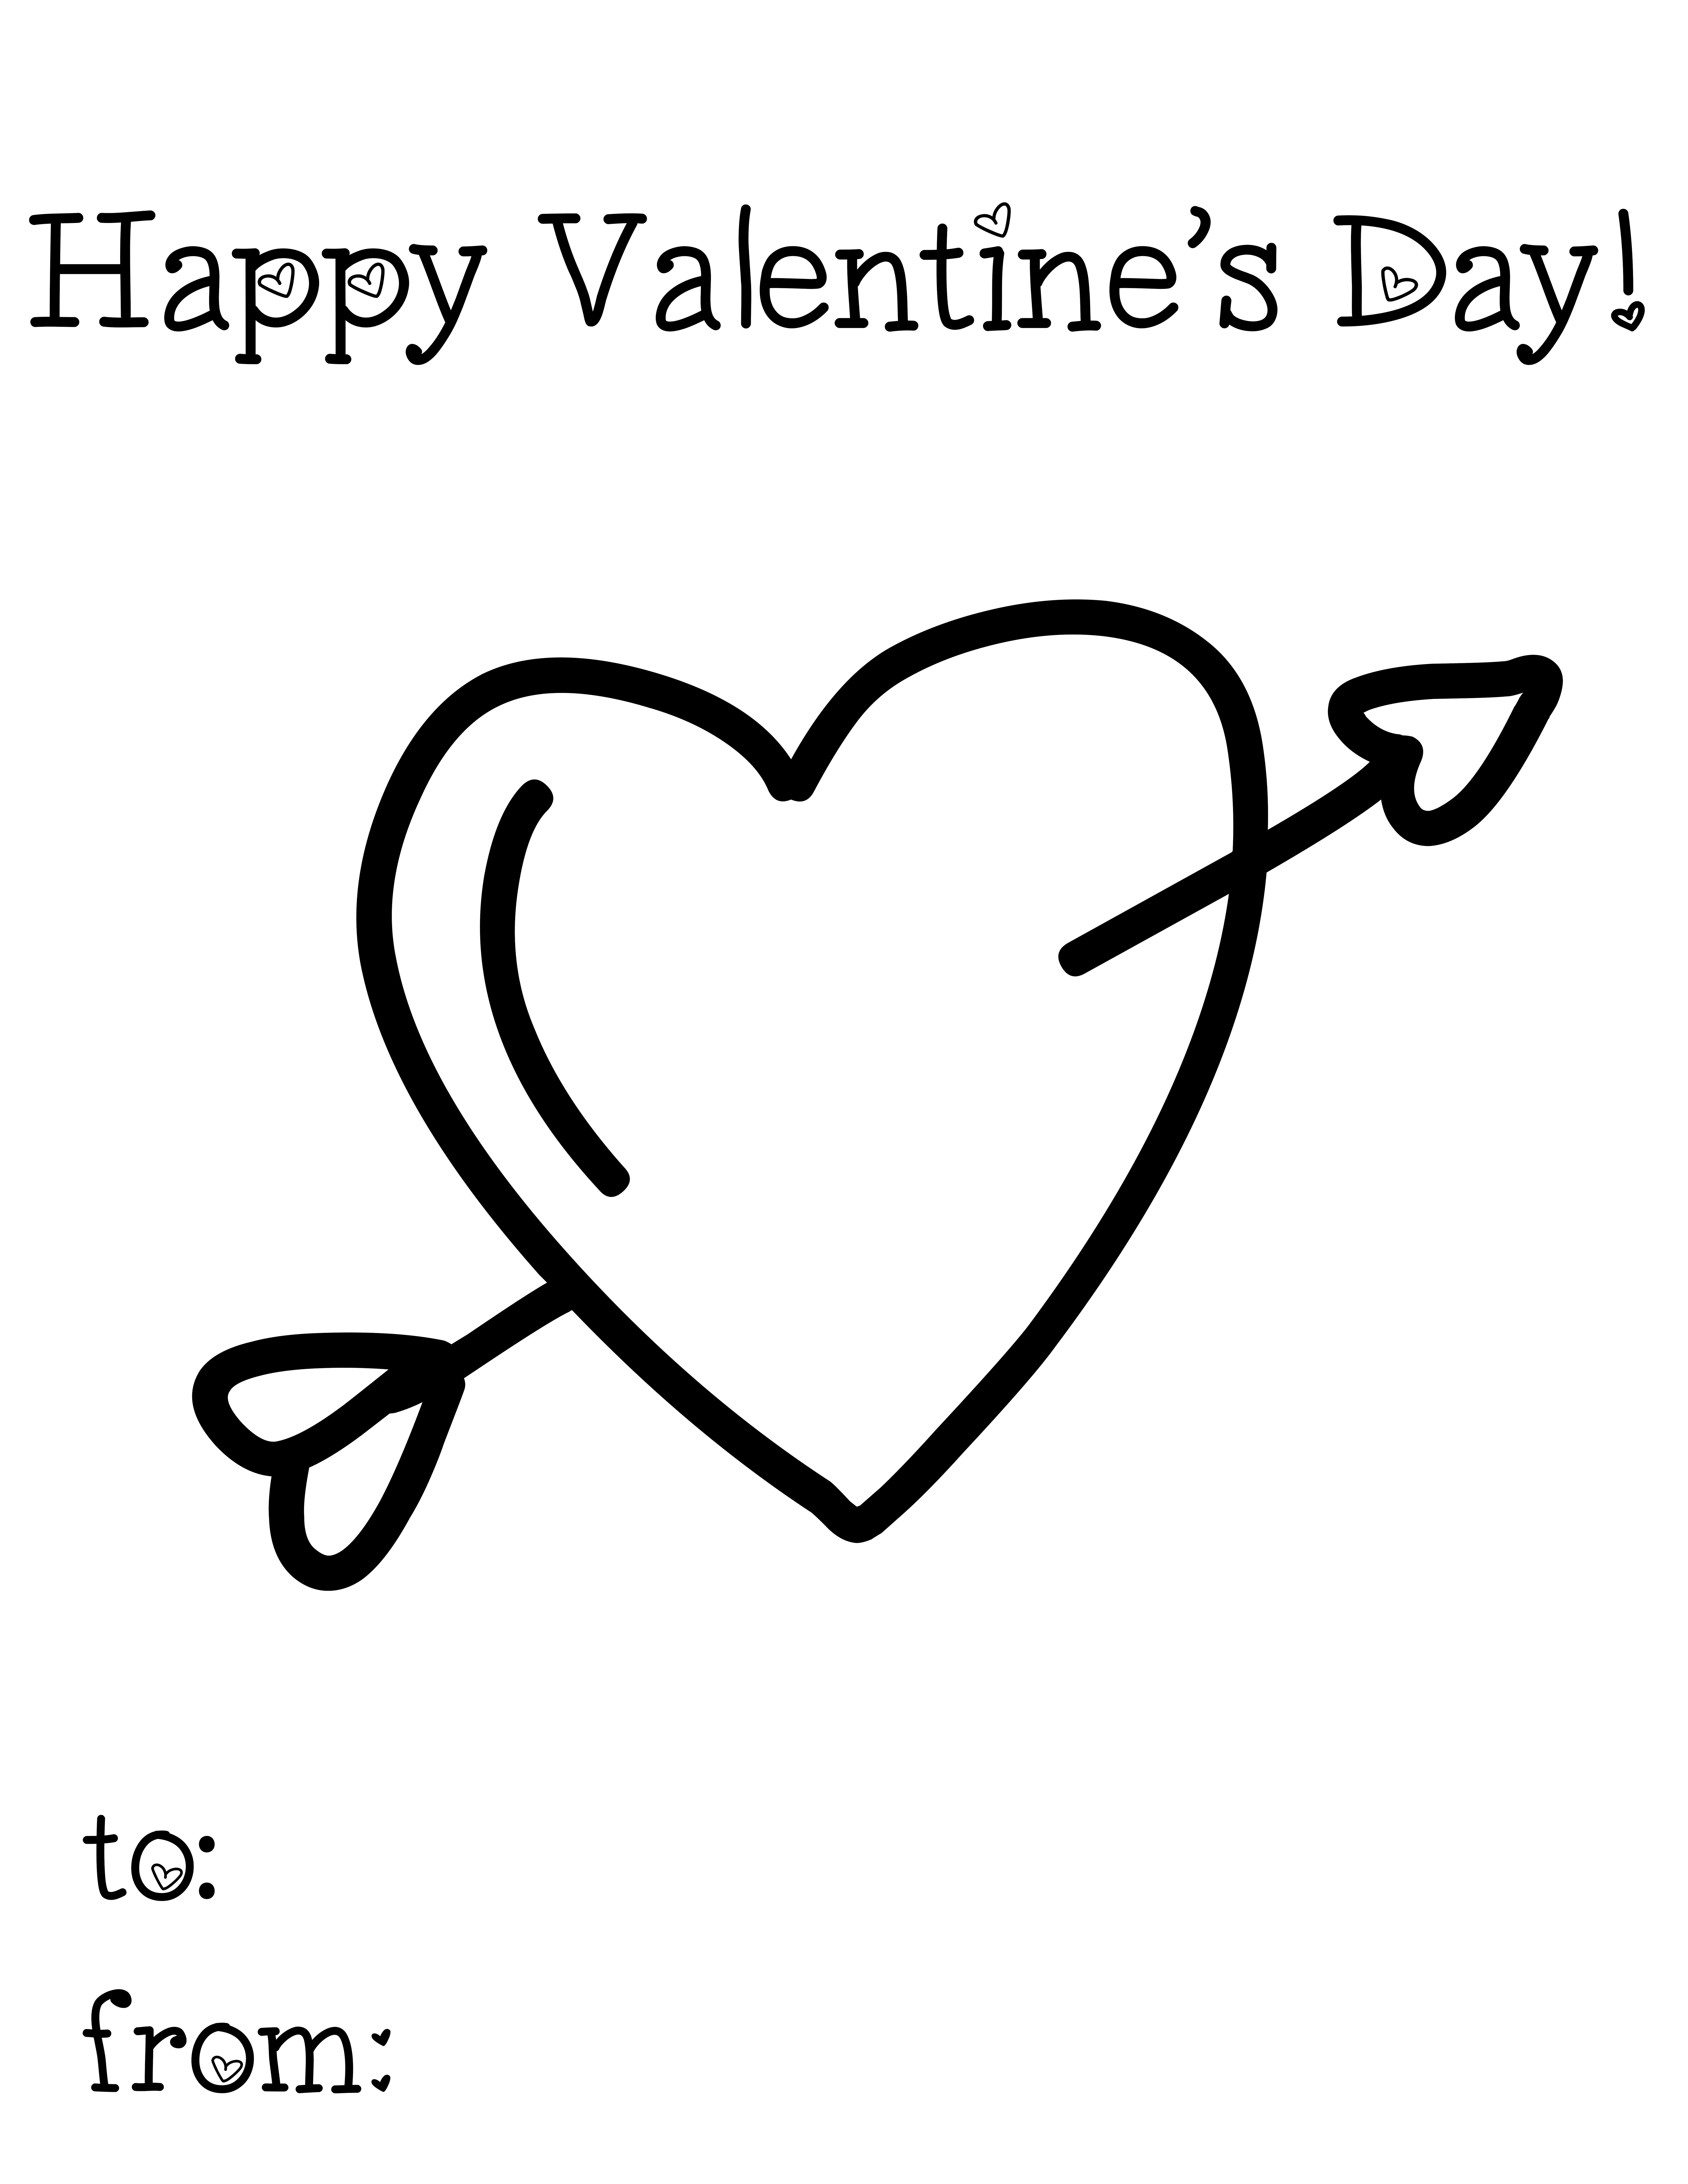 Valentines Day Hearts Coloring Pages Coloring Pages Coloring Pages Free Valentine Valentines Day For